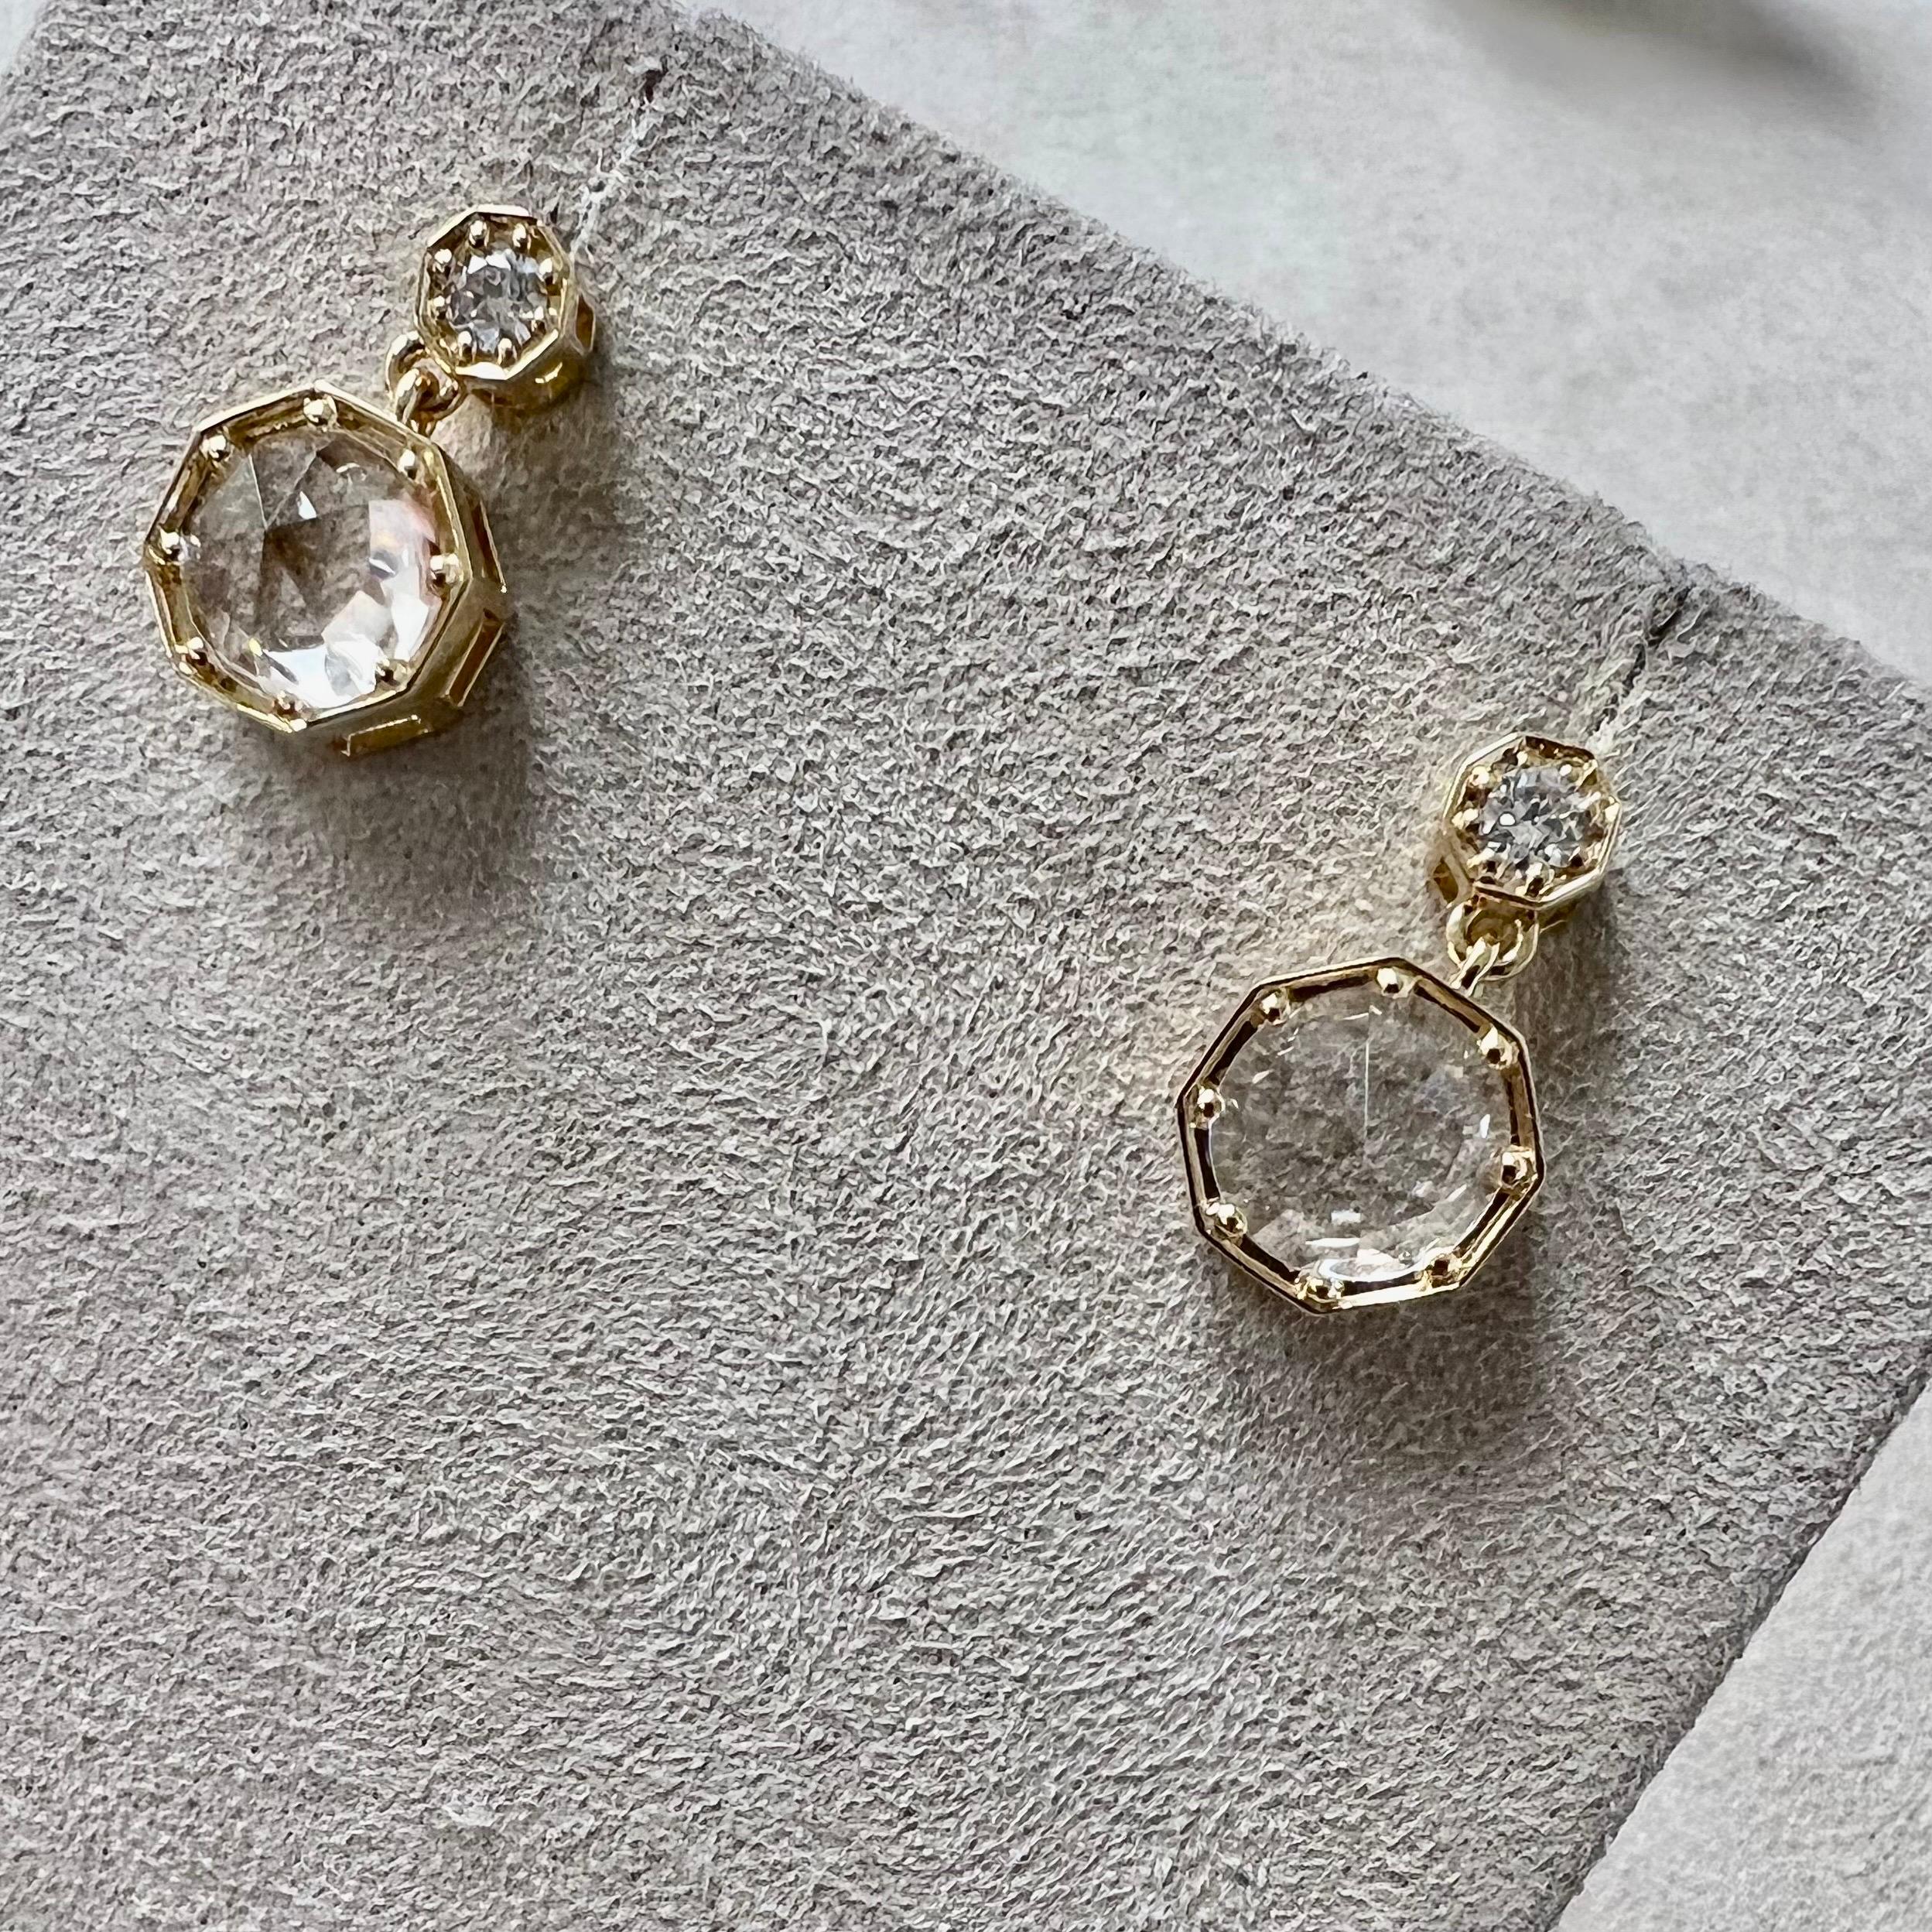 Created in 18 karat yellow gold
Rock crystal 3 carats approx.
Diamonds 0.20 carat approx.
18kyg butterfly backs

Formulated from 18 karat yellow gold, these earrings captivate with an estimated 3 carats of rock crystal and 0.20 carats of diamonds,